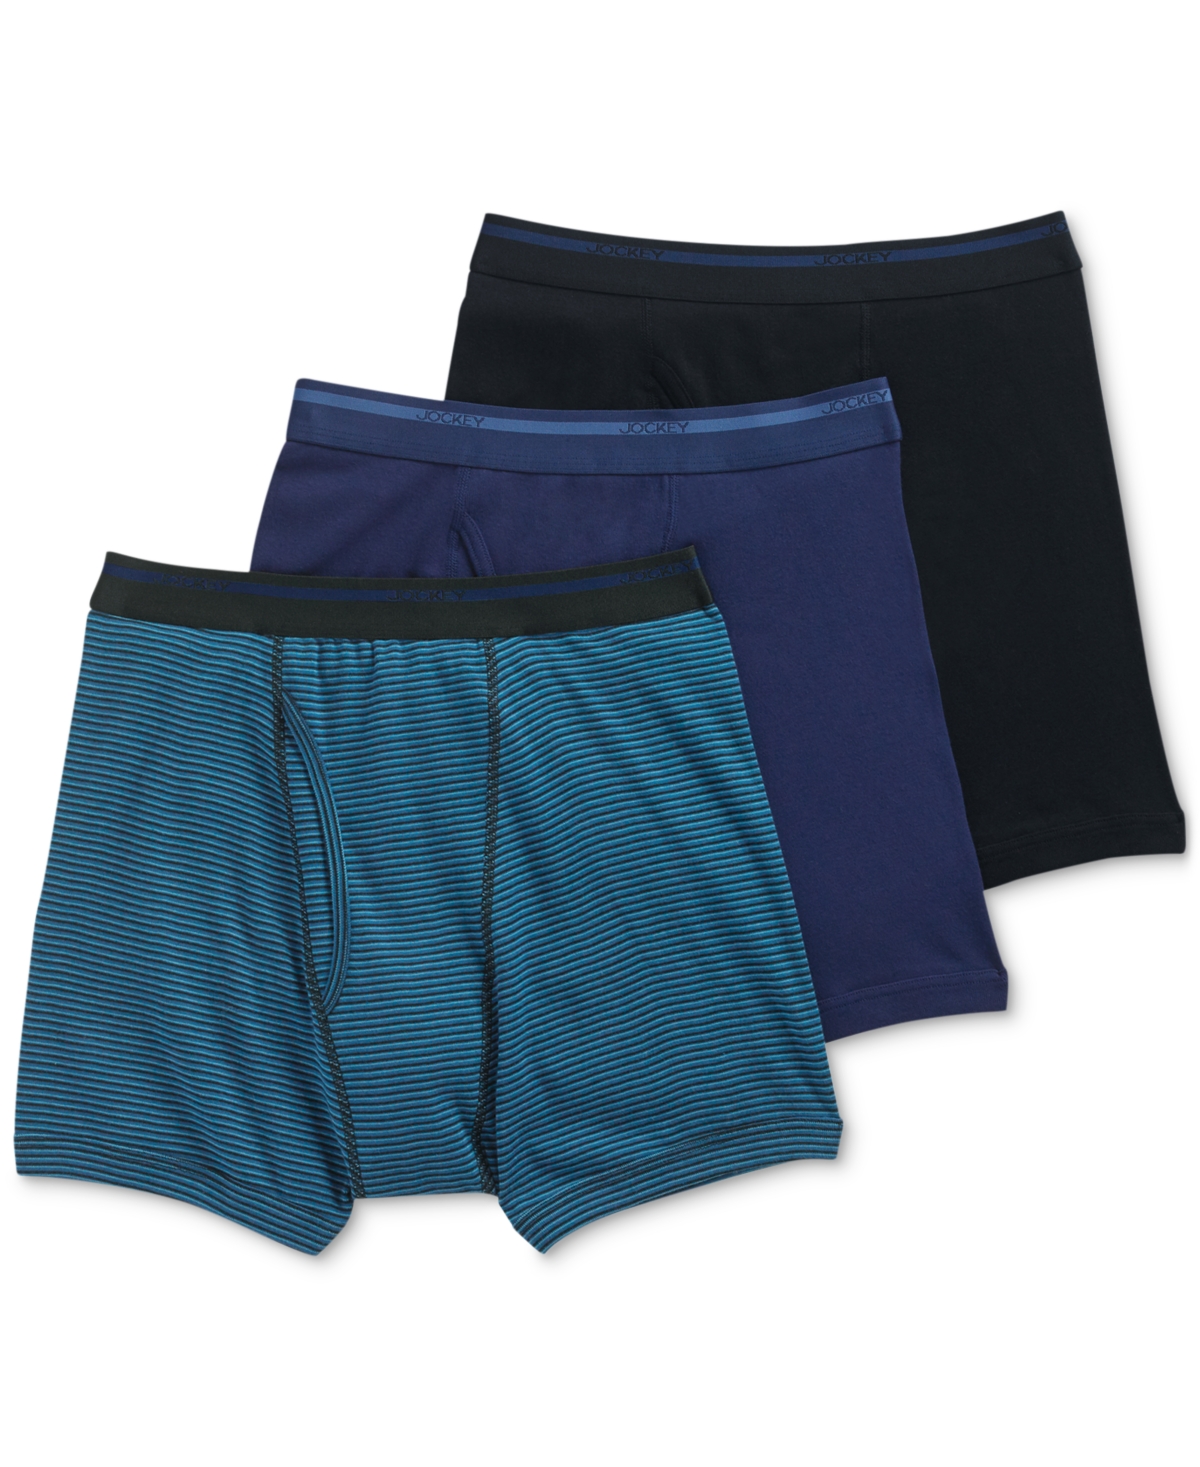 Men's Classic 3 Pack Cotton Boxer Briefs - Red/Blue Assorted